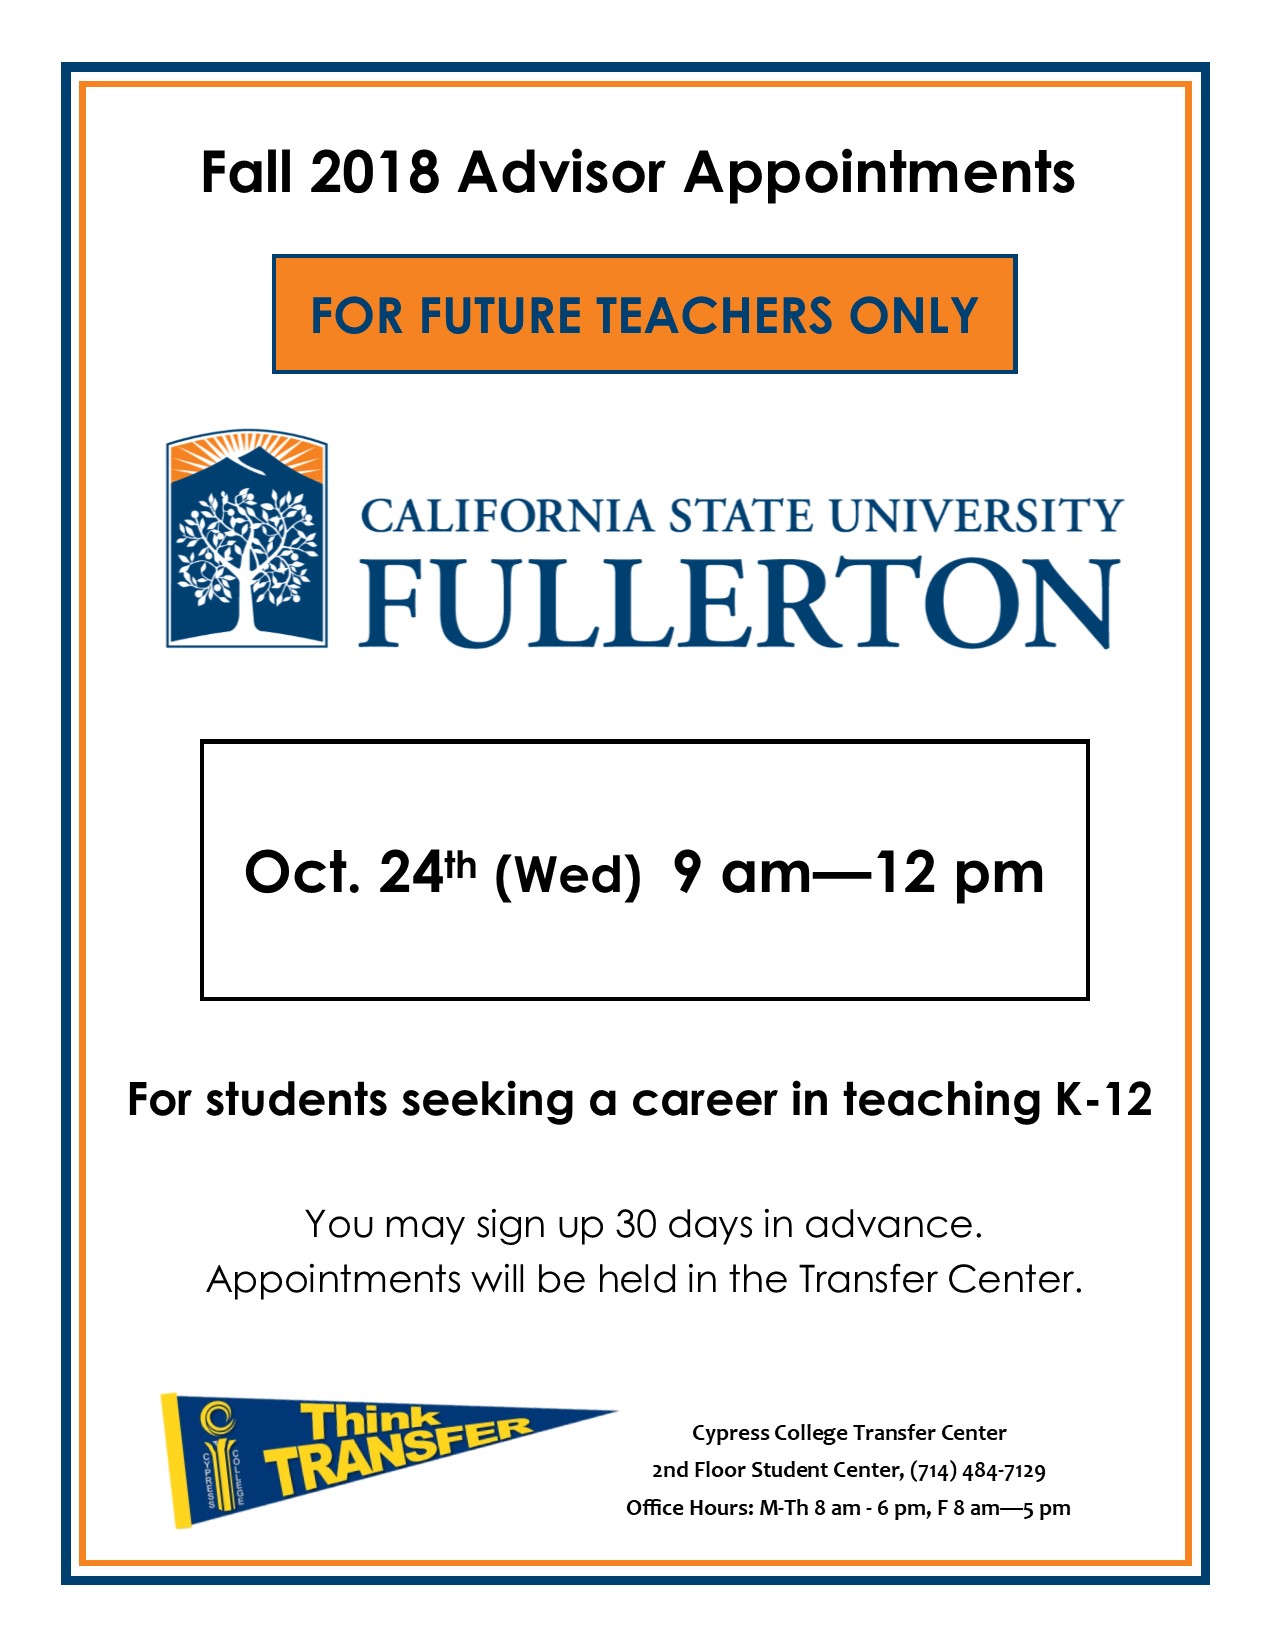 Fall 2018 Advisor Appointments For Future Teachers Only California State University Fullerton.